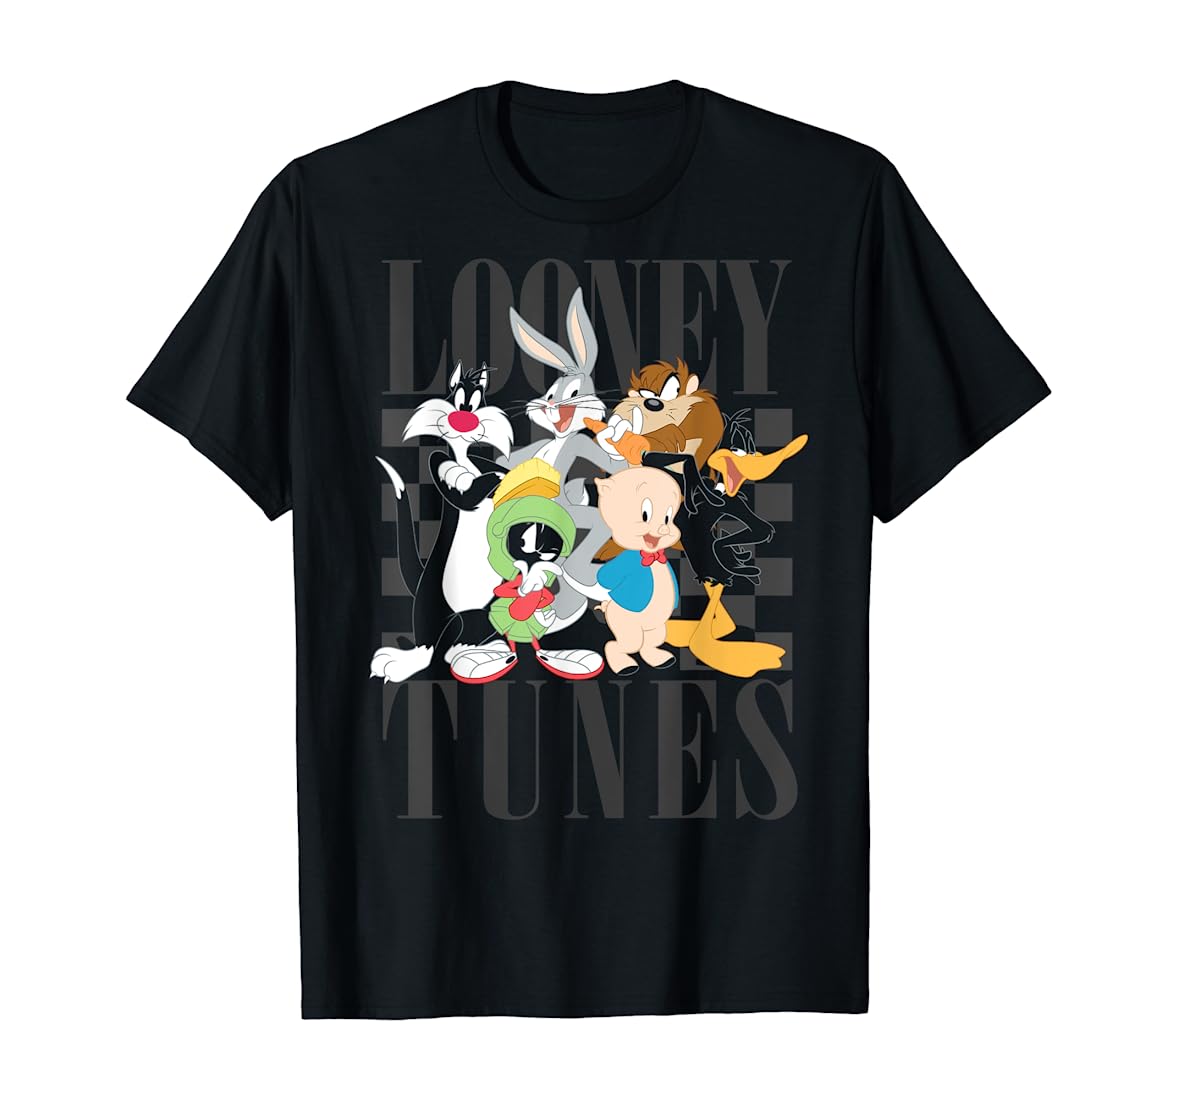 Toon Fashion: A Review of Looney Tunes T-Shirts from the 90s